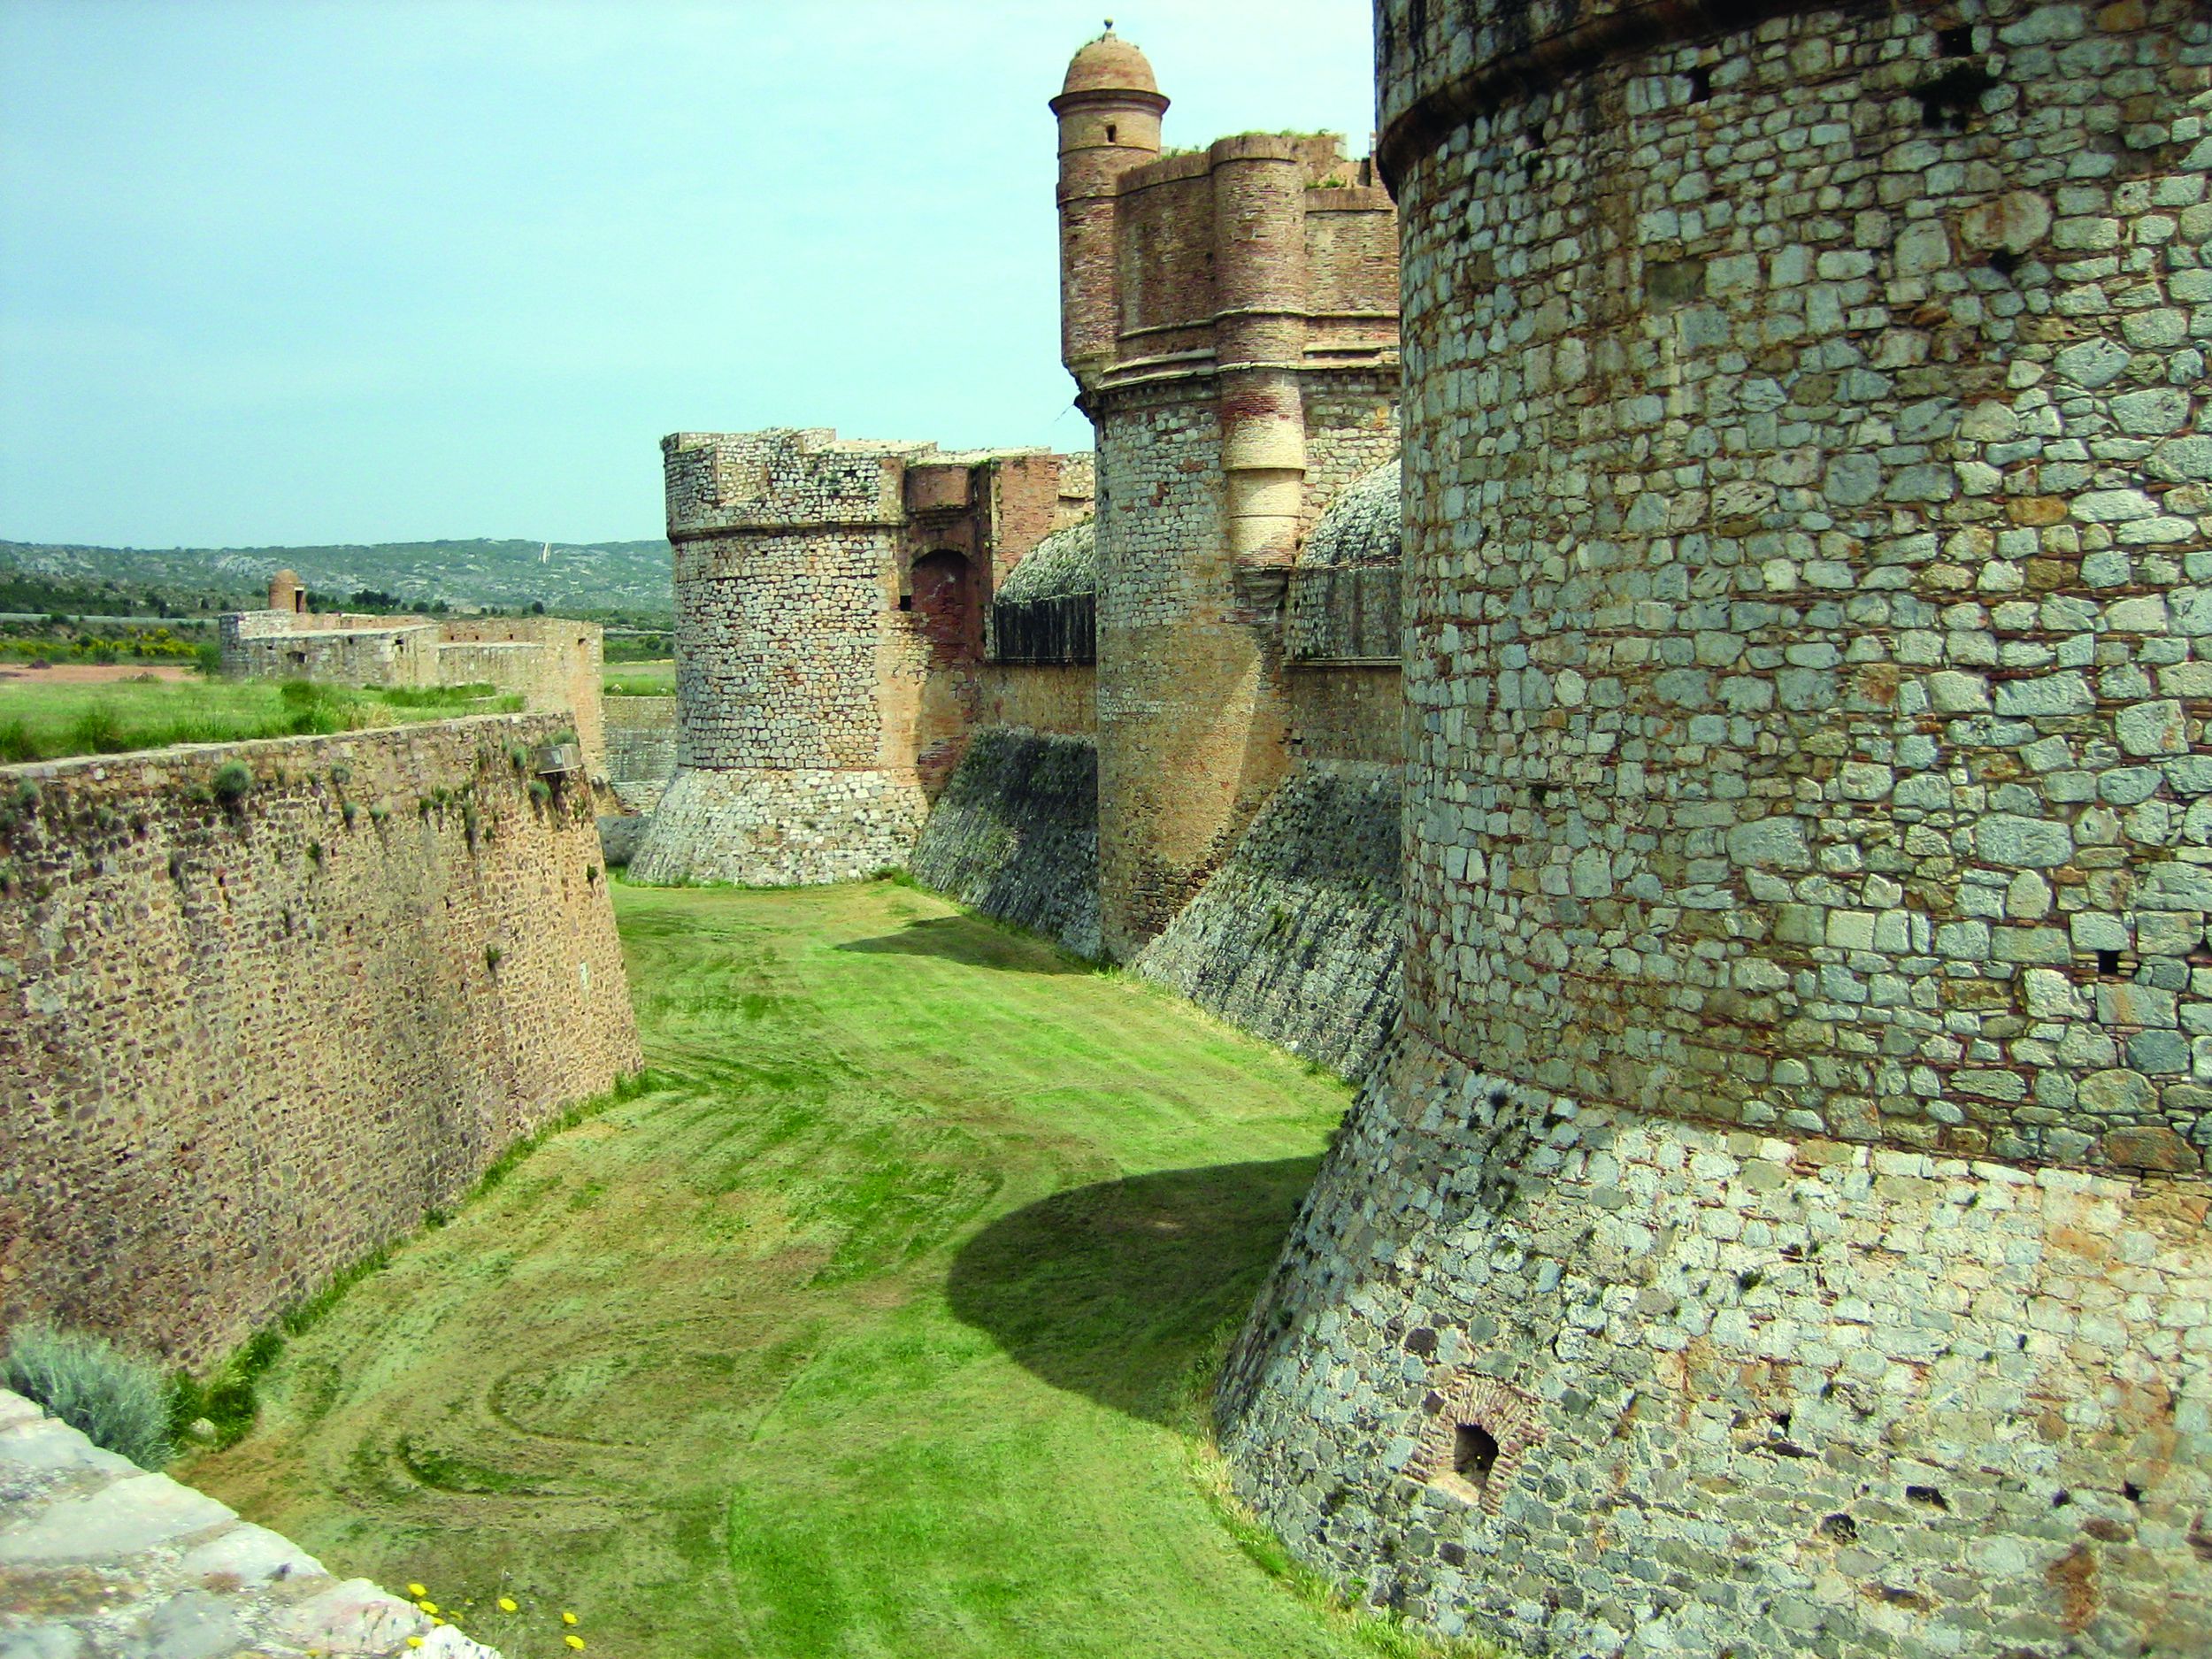 Salses is protected by a wide dry moat, glacis, and three independent pointed towers.